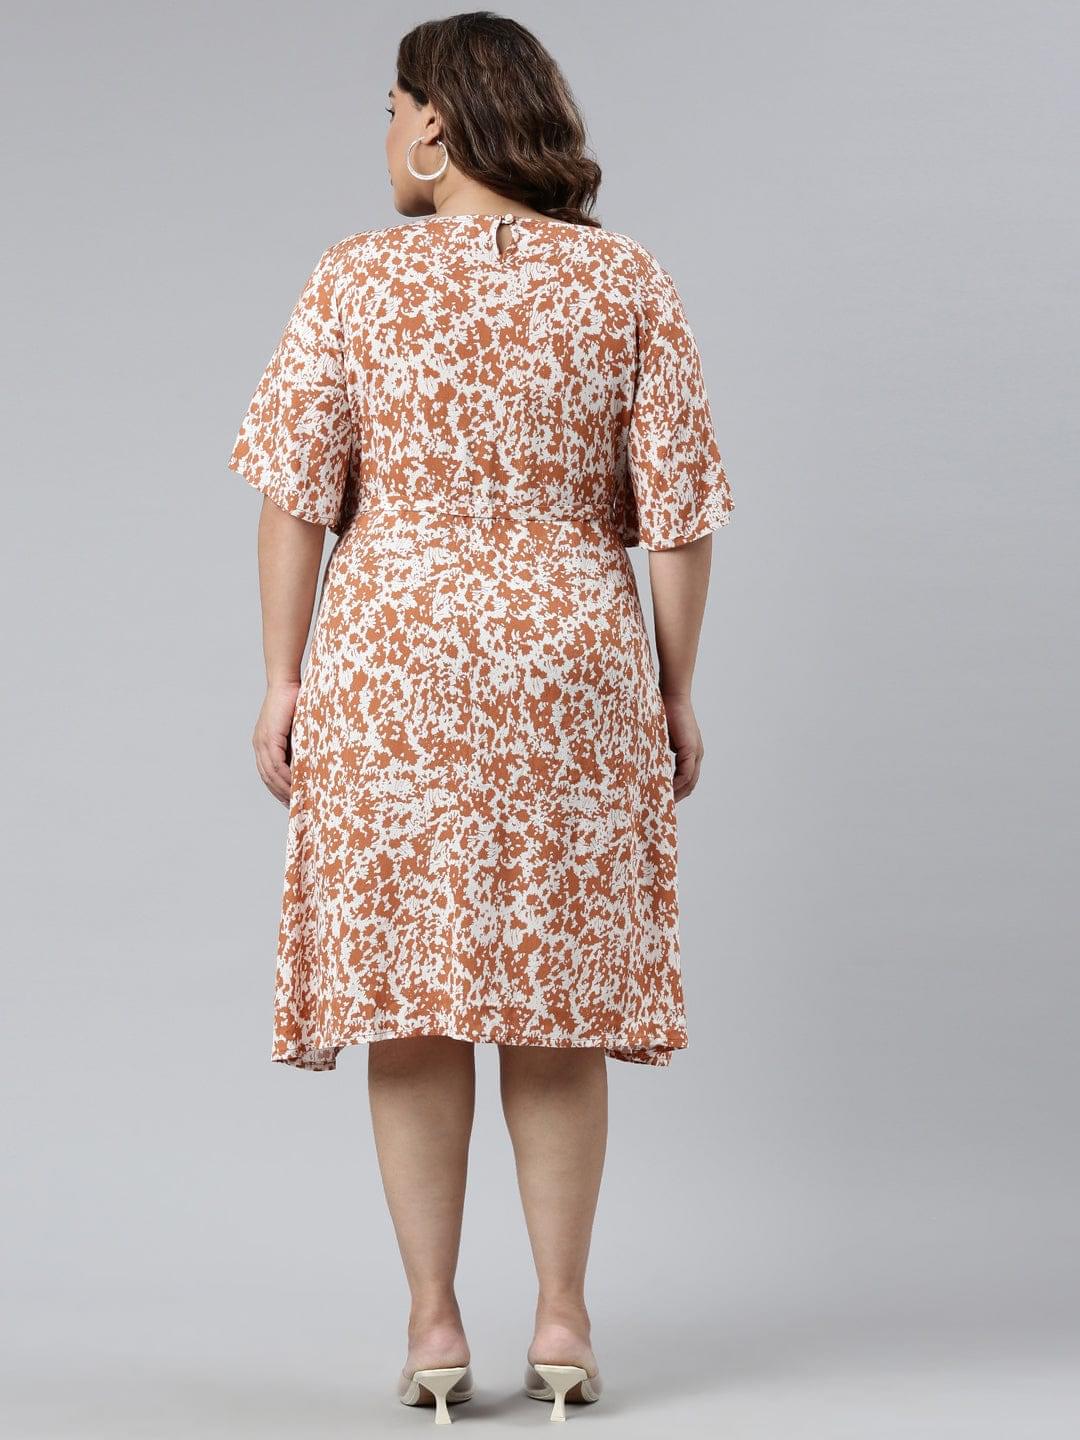 Brown and white viscose A-line dress